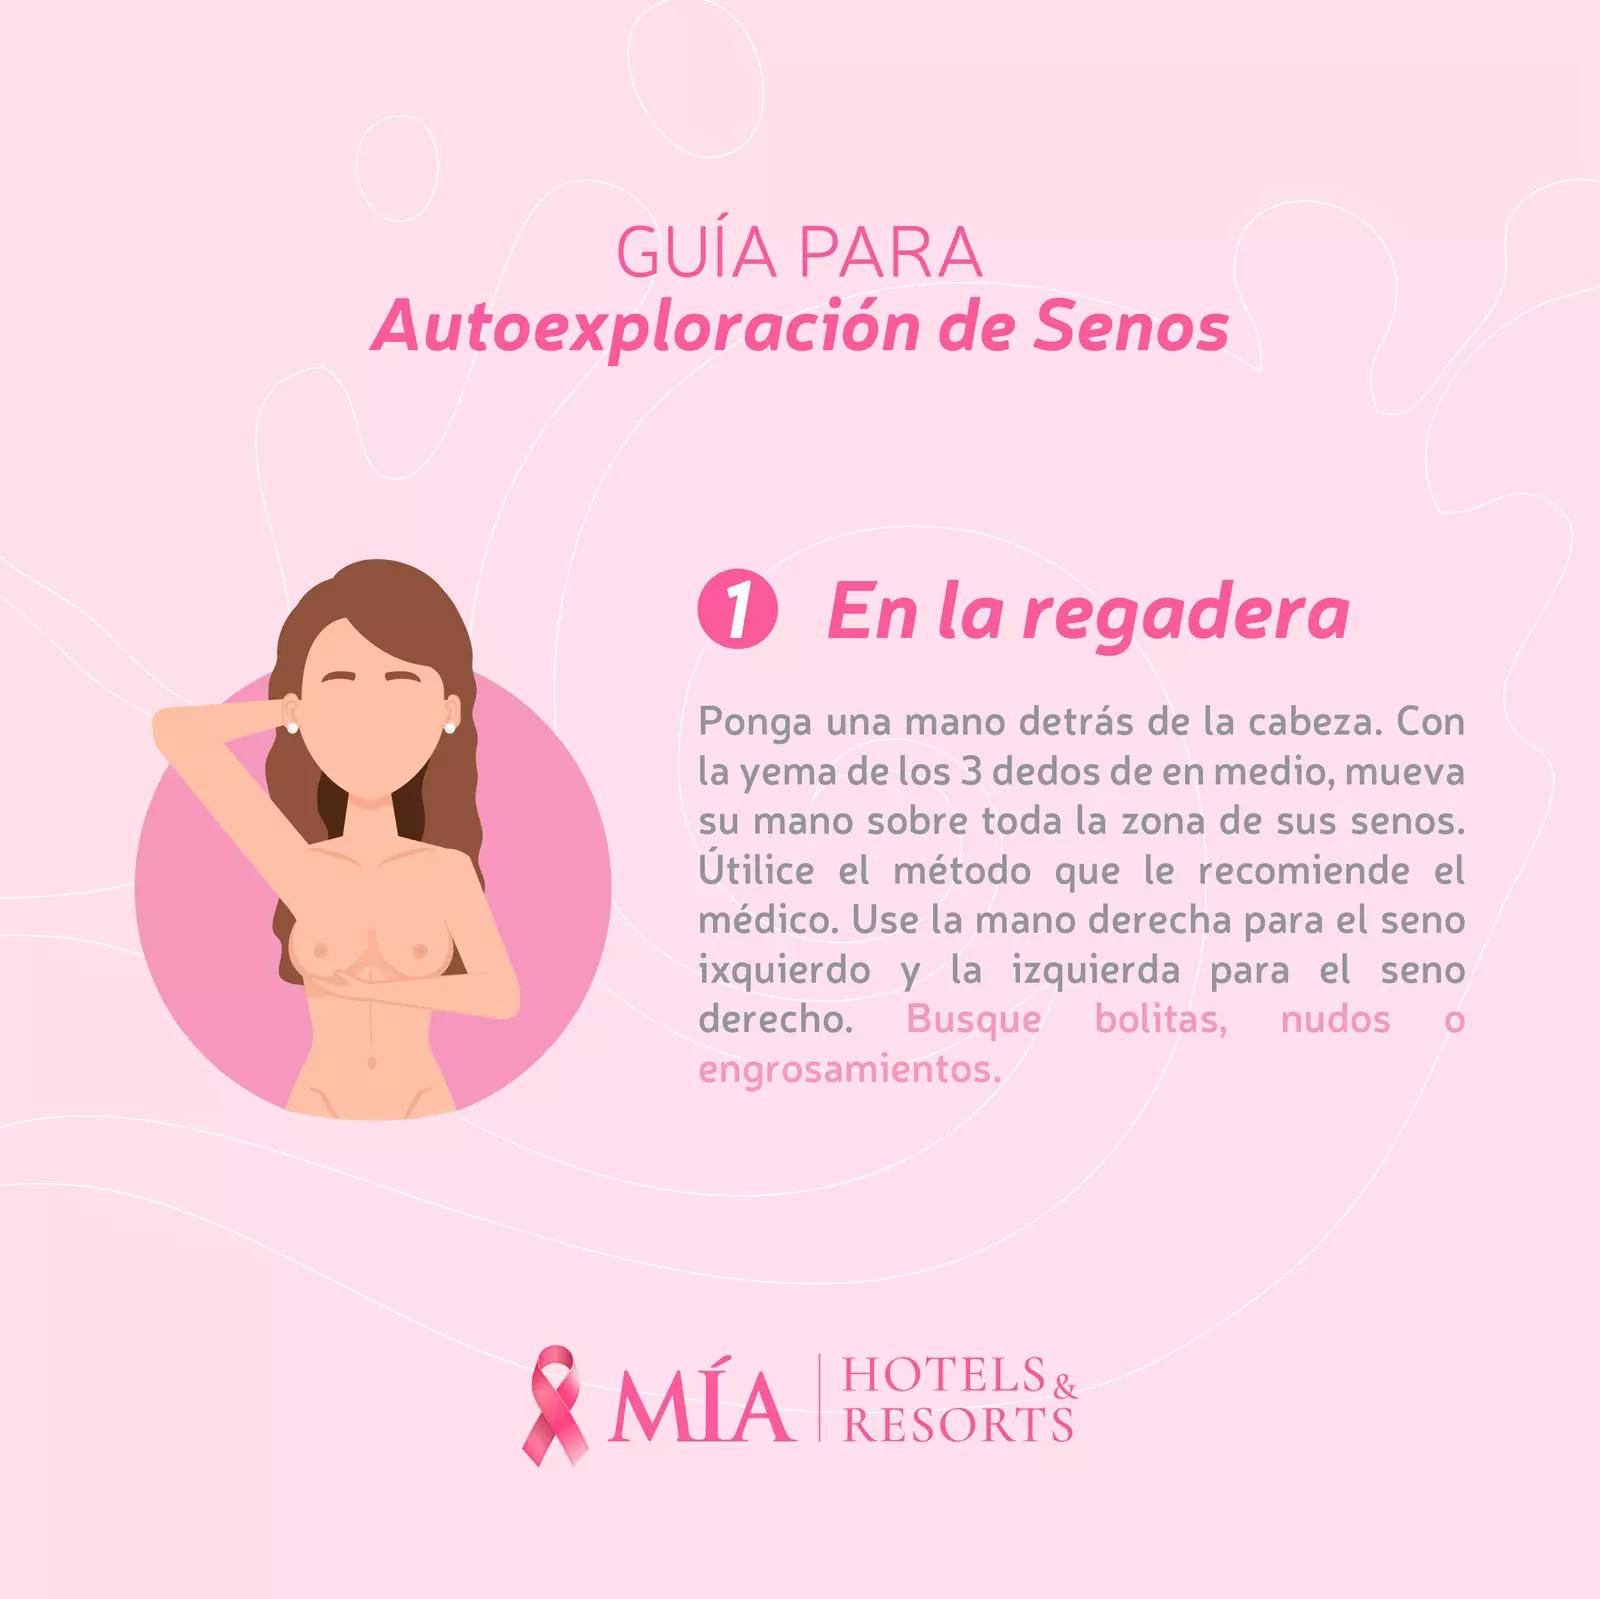 Guide to breast self-exam